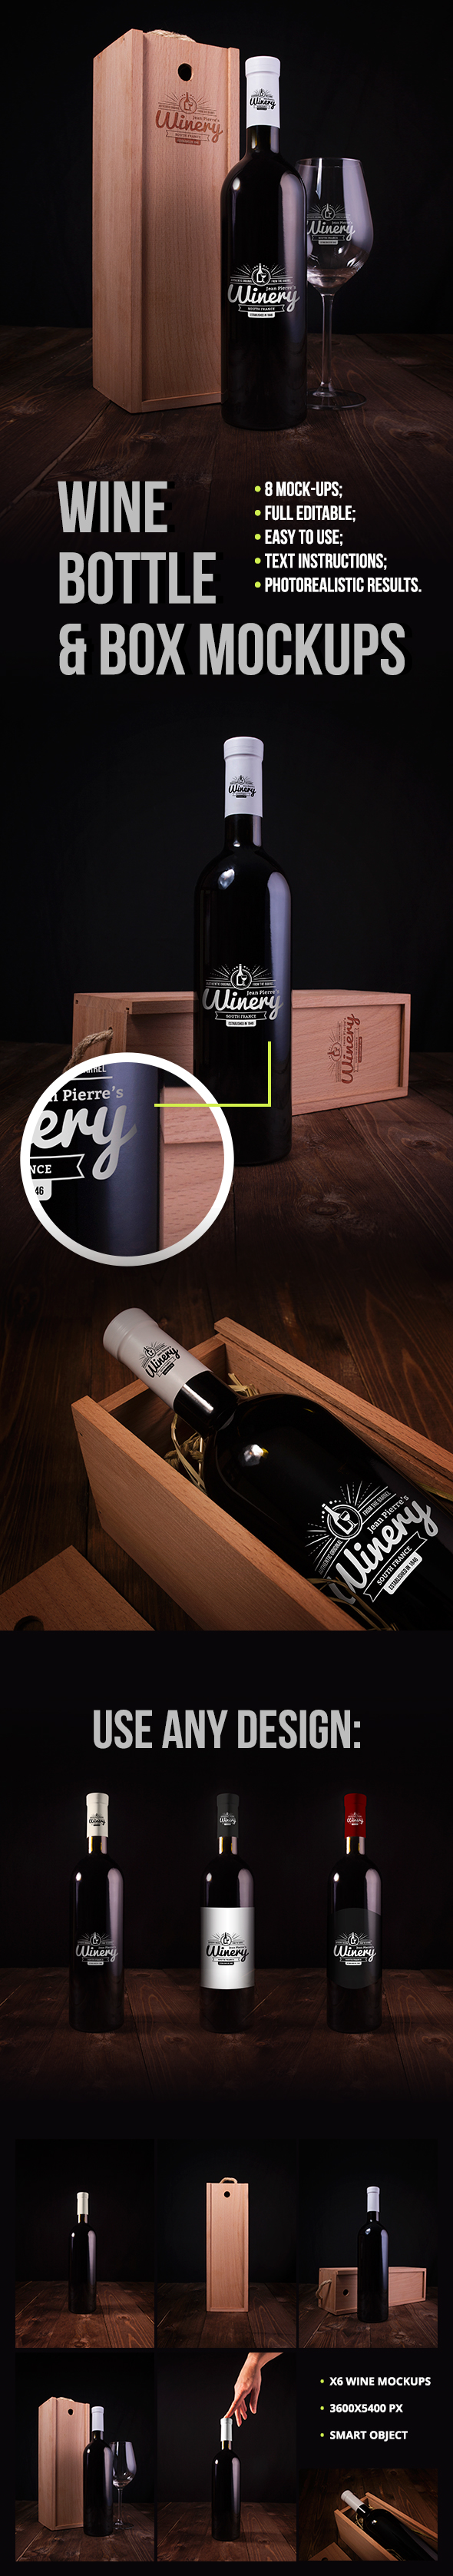 Download Wine Bottle and Box Mockup on Behance